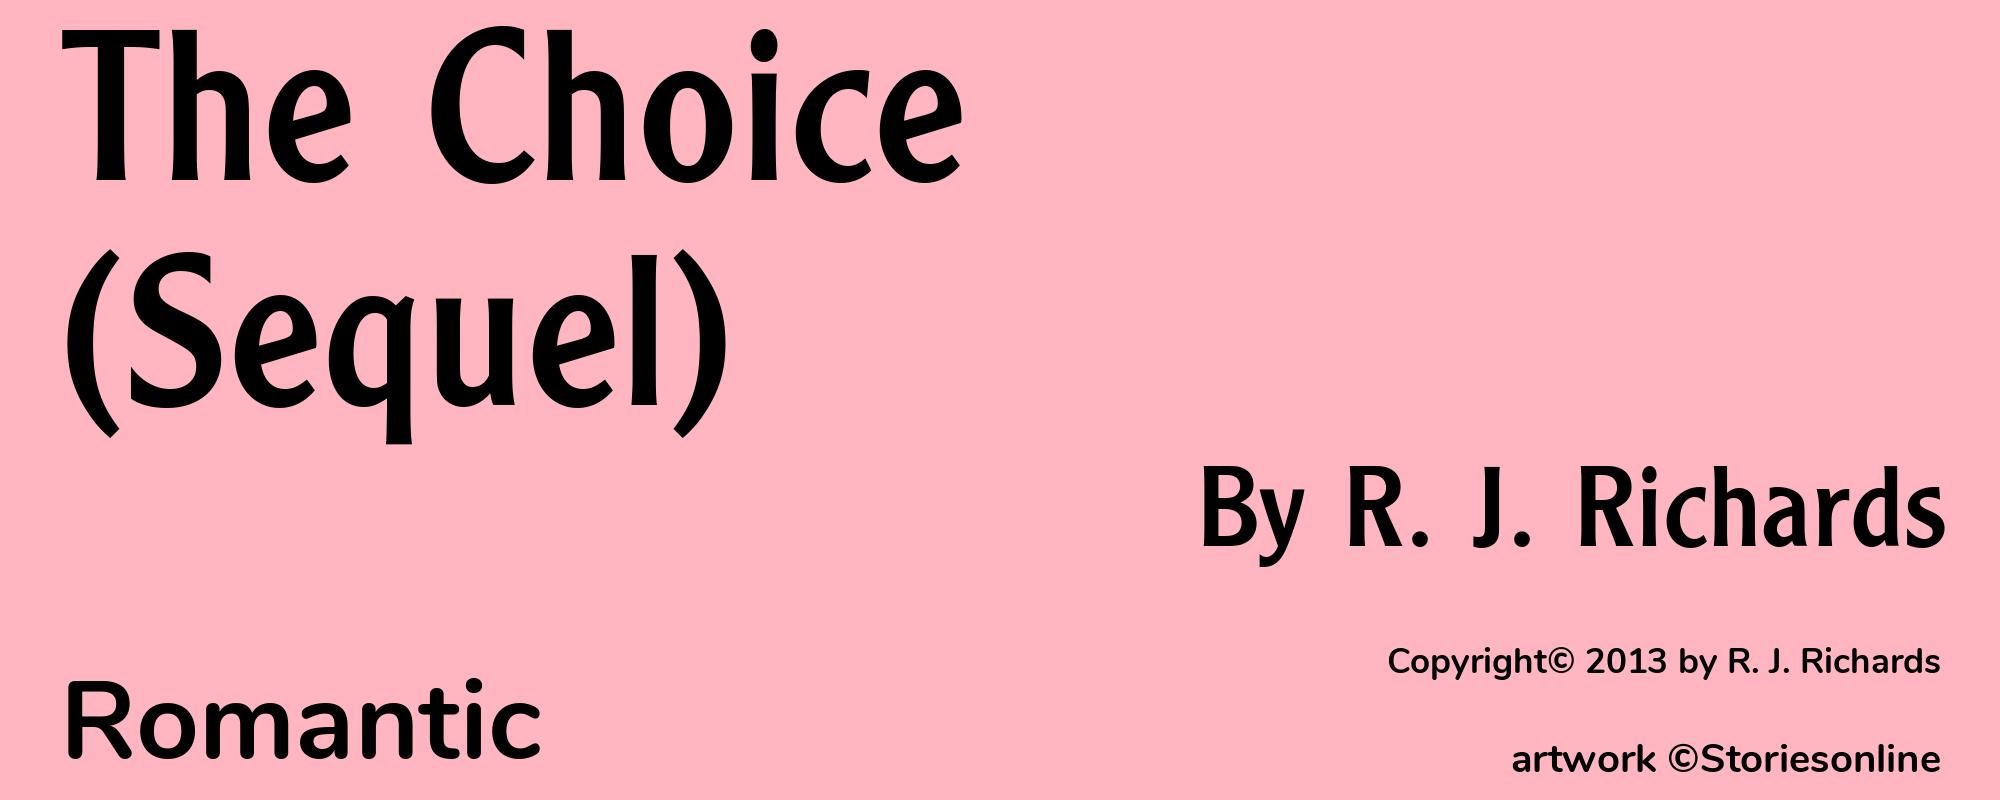 The Choice (Sequel) - Cover